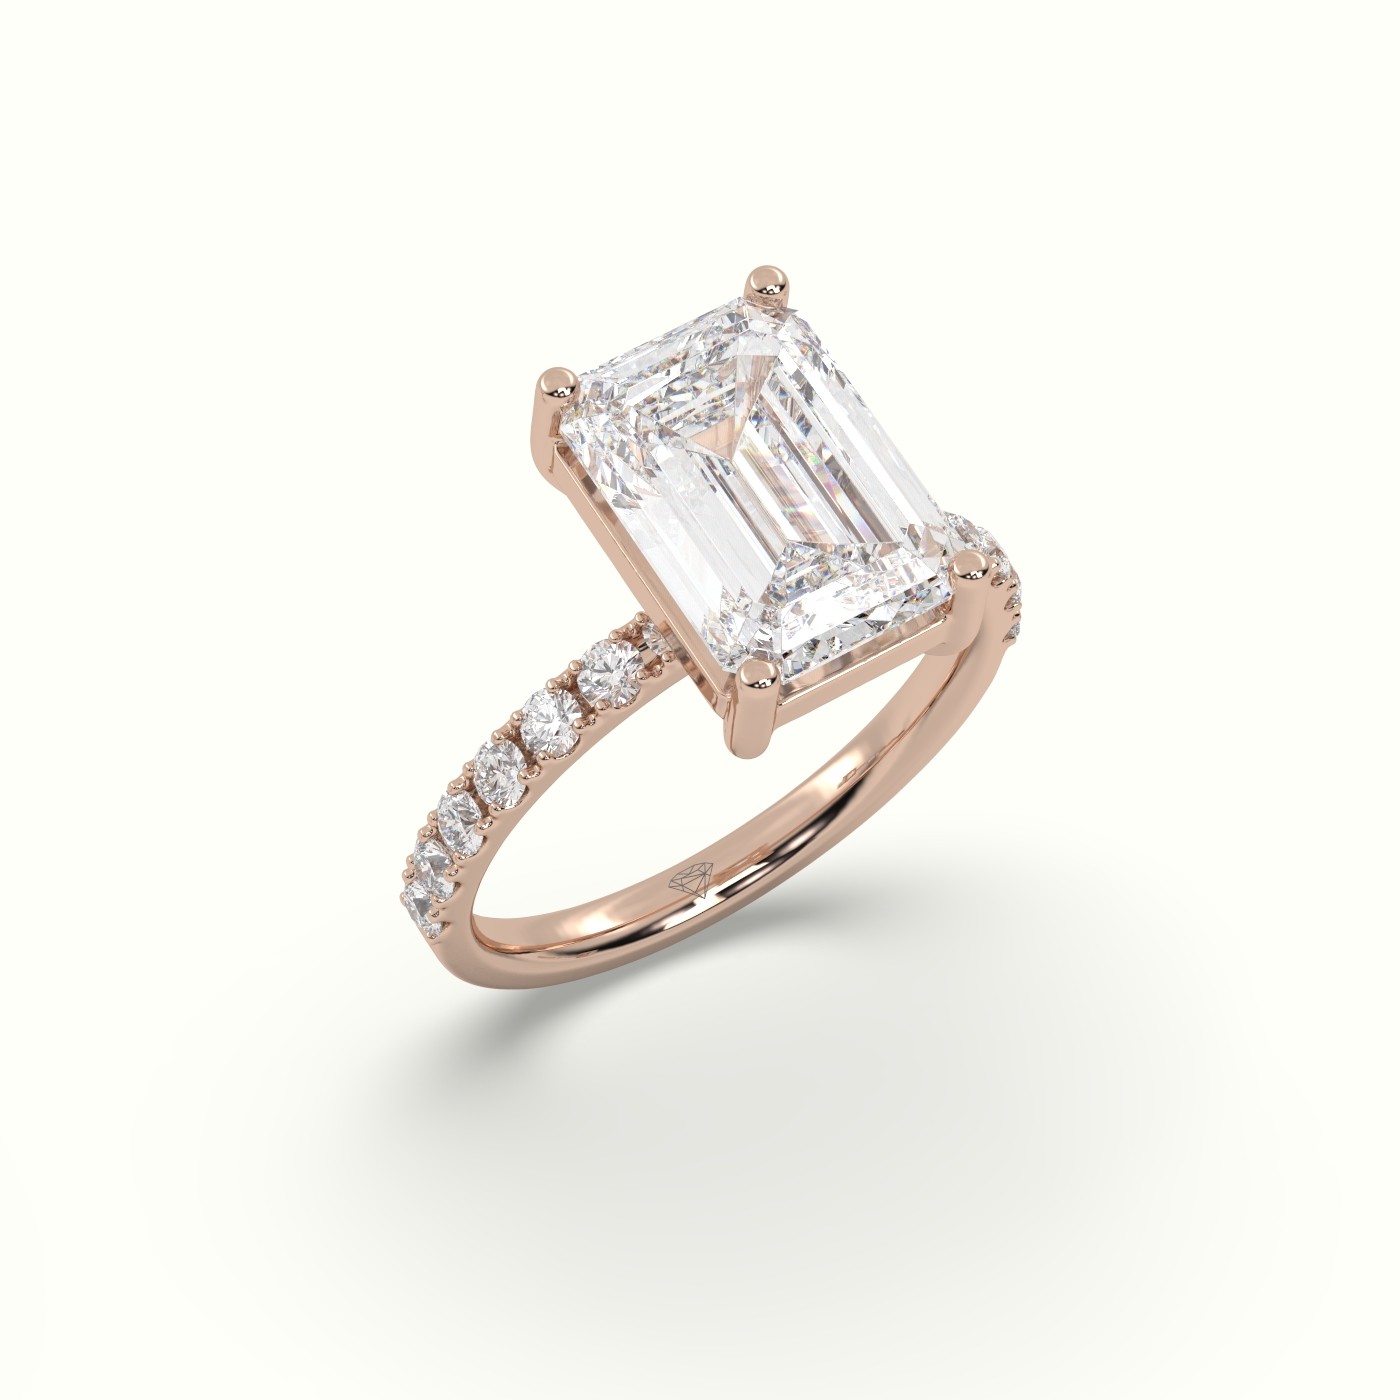 18K ROSE GOLD Emerald Cut Diamond Engagement Ring with Pave Band